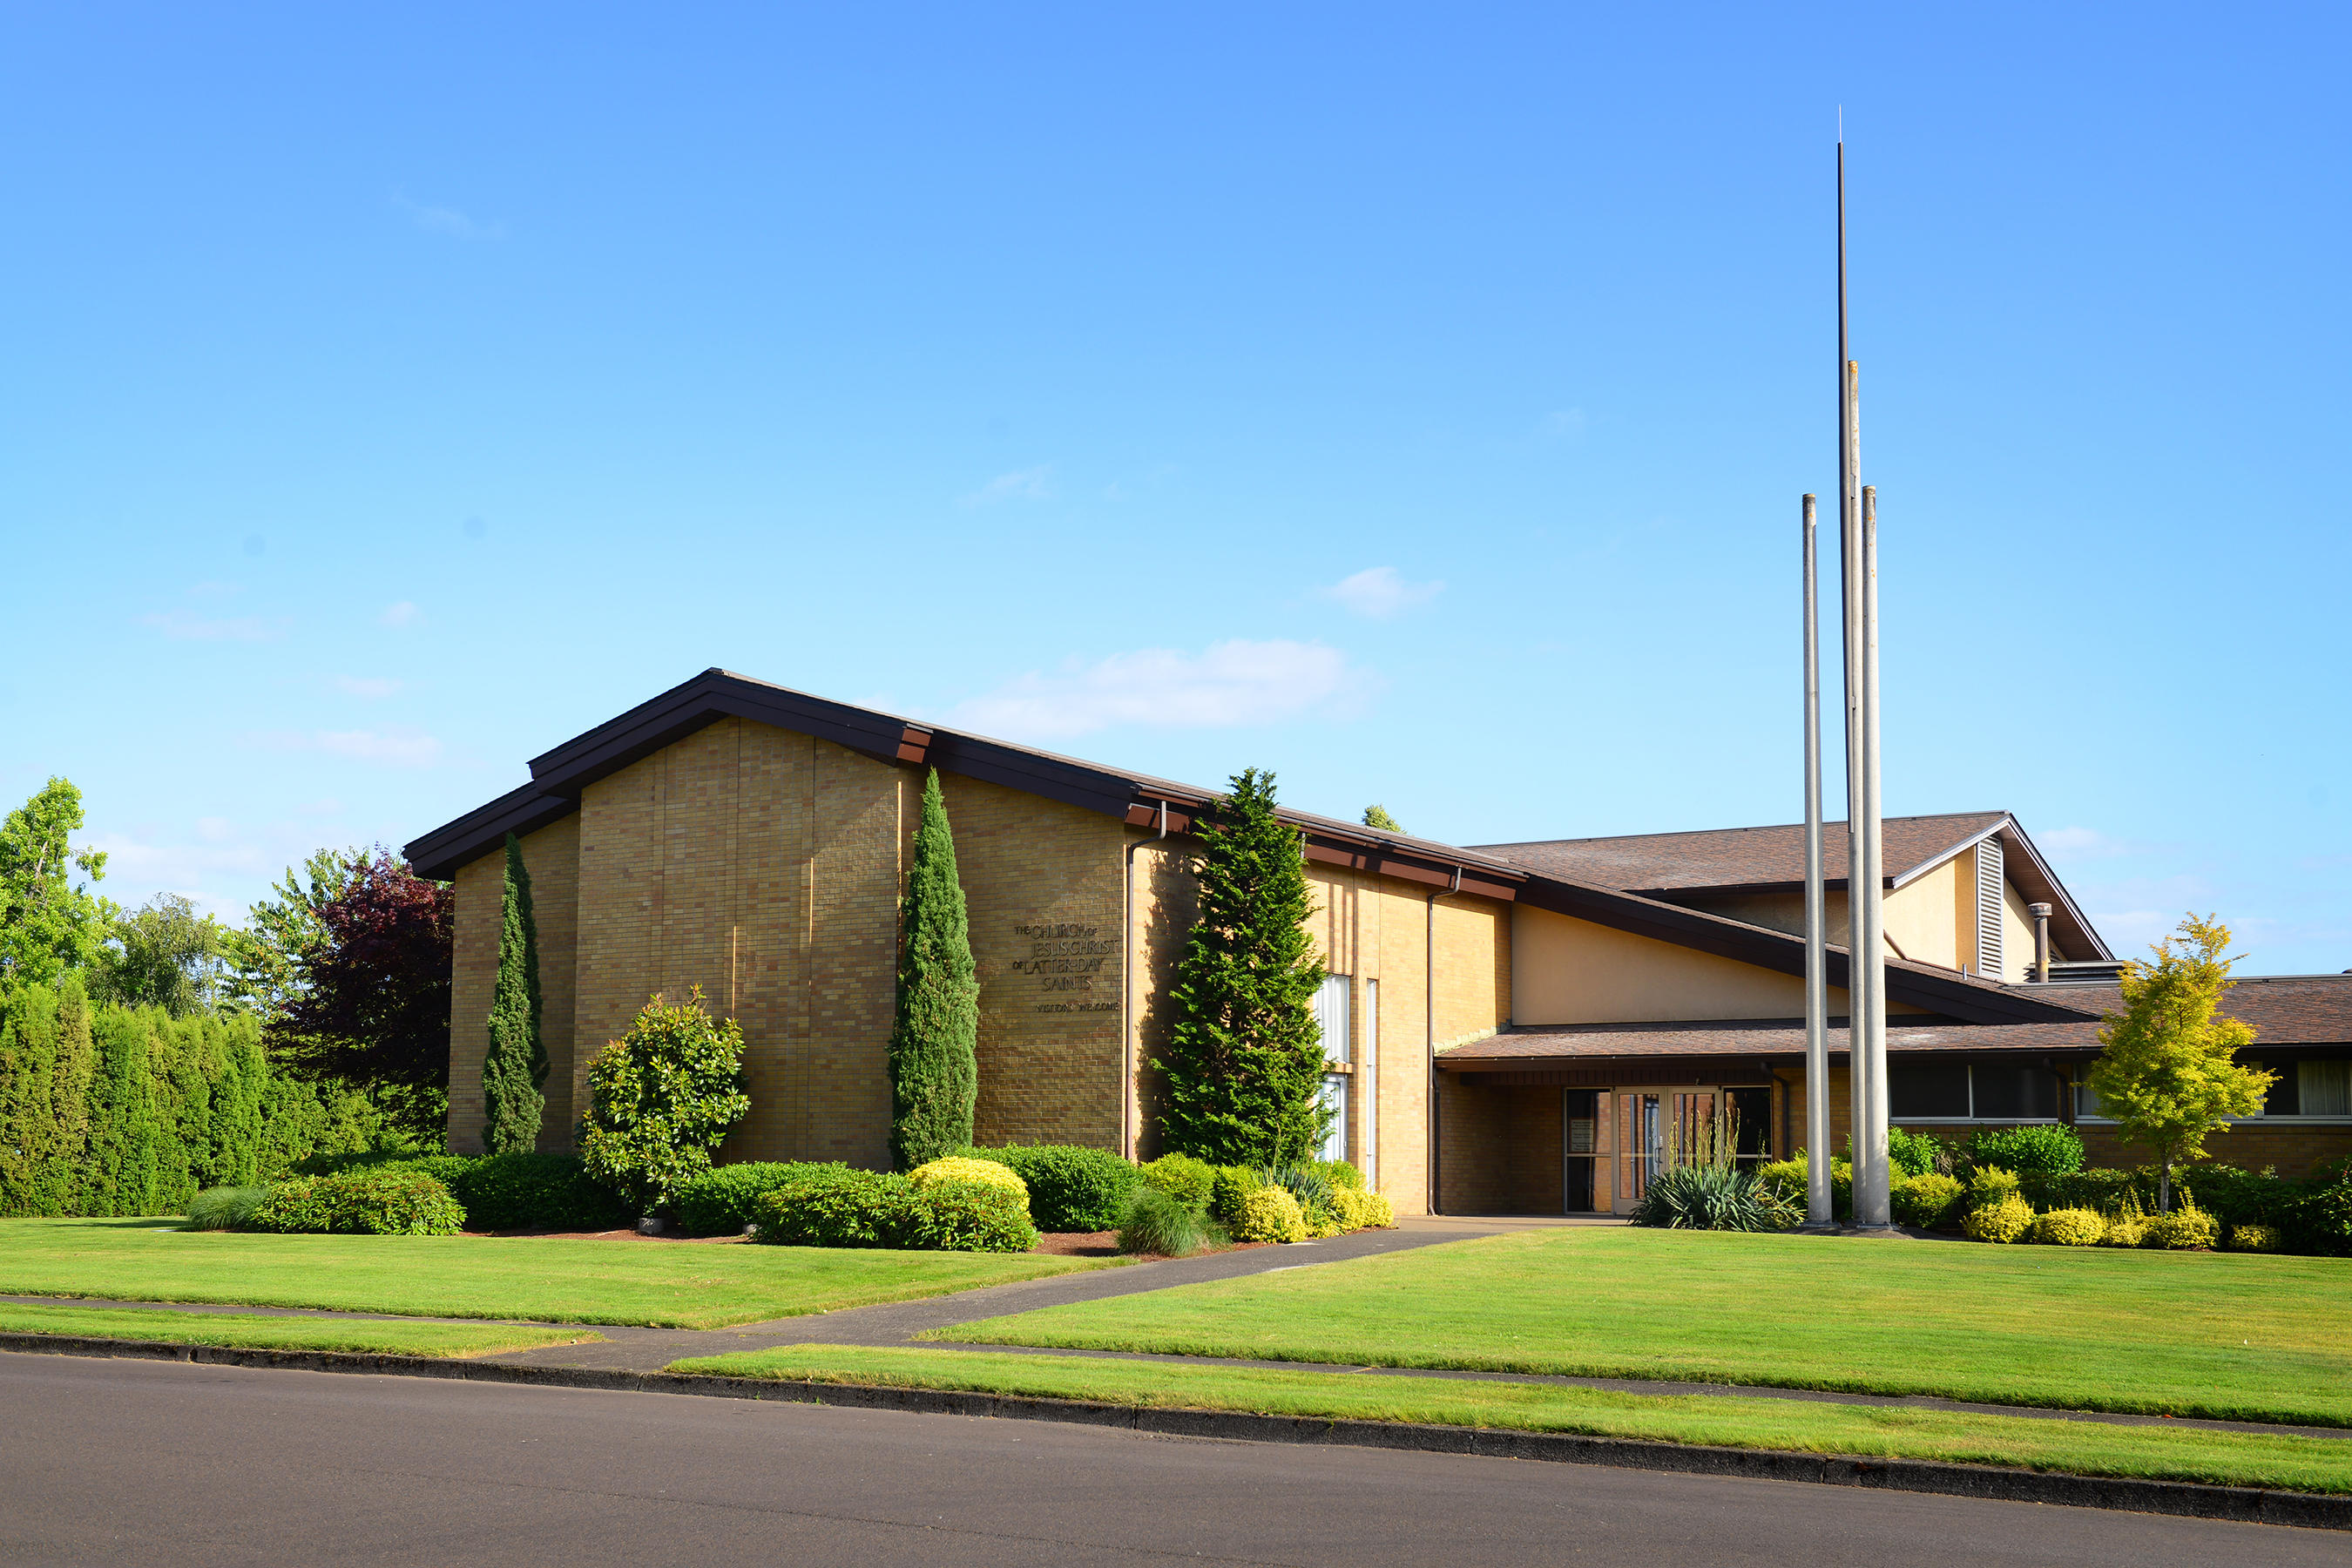 The Church of Jesus Christ of Latter-day Saints Church Building in Stayton, Oregon